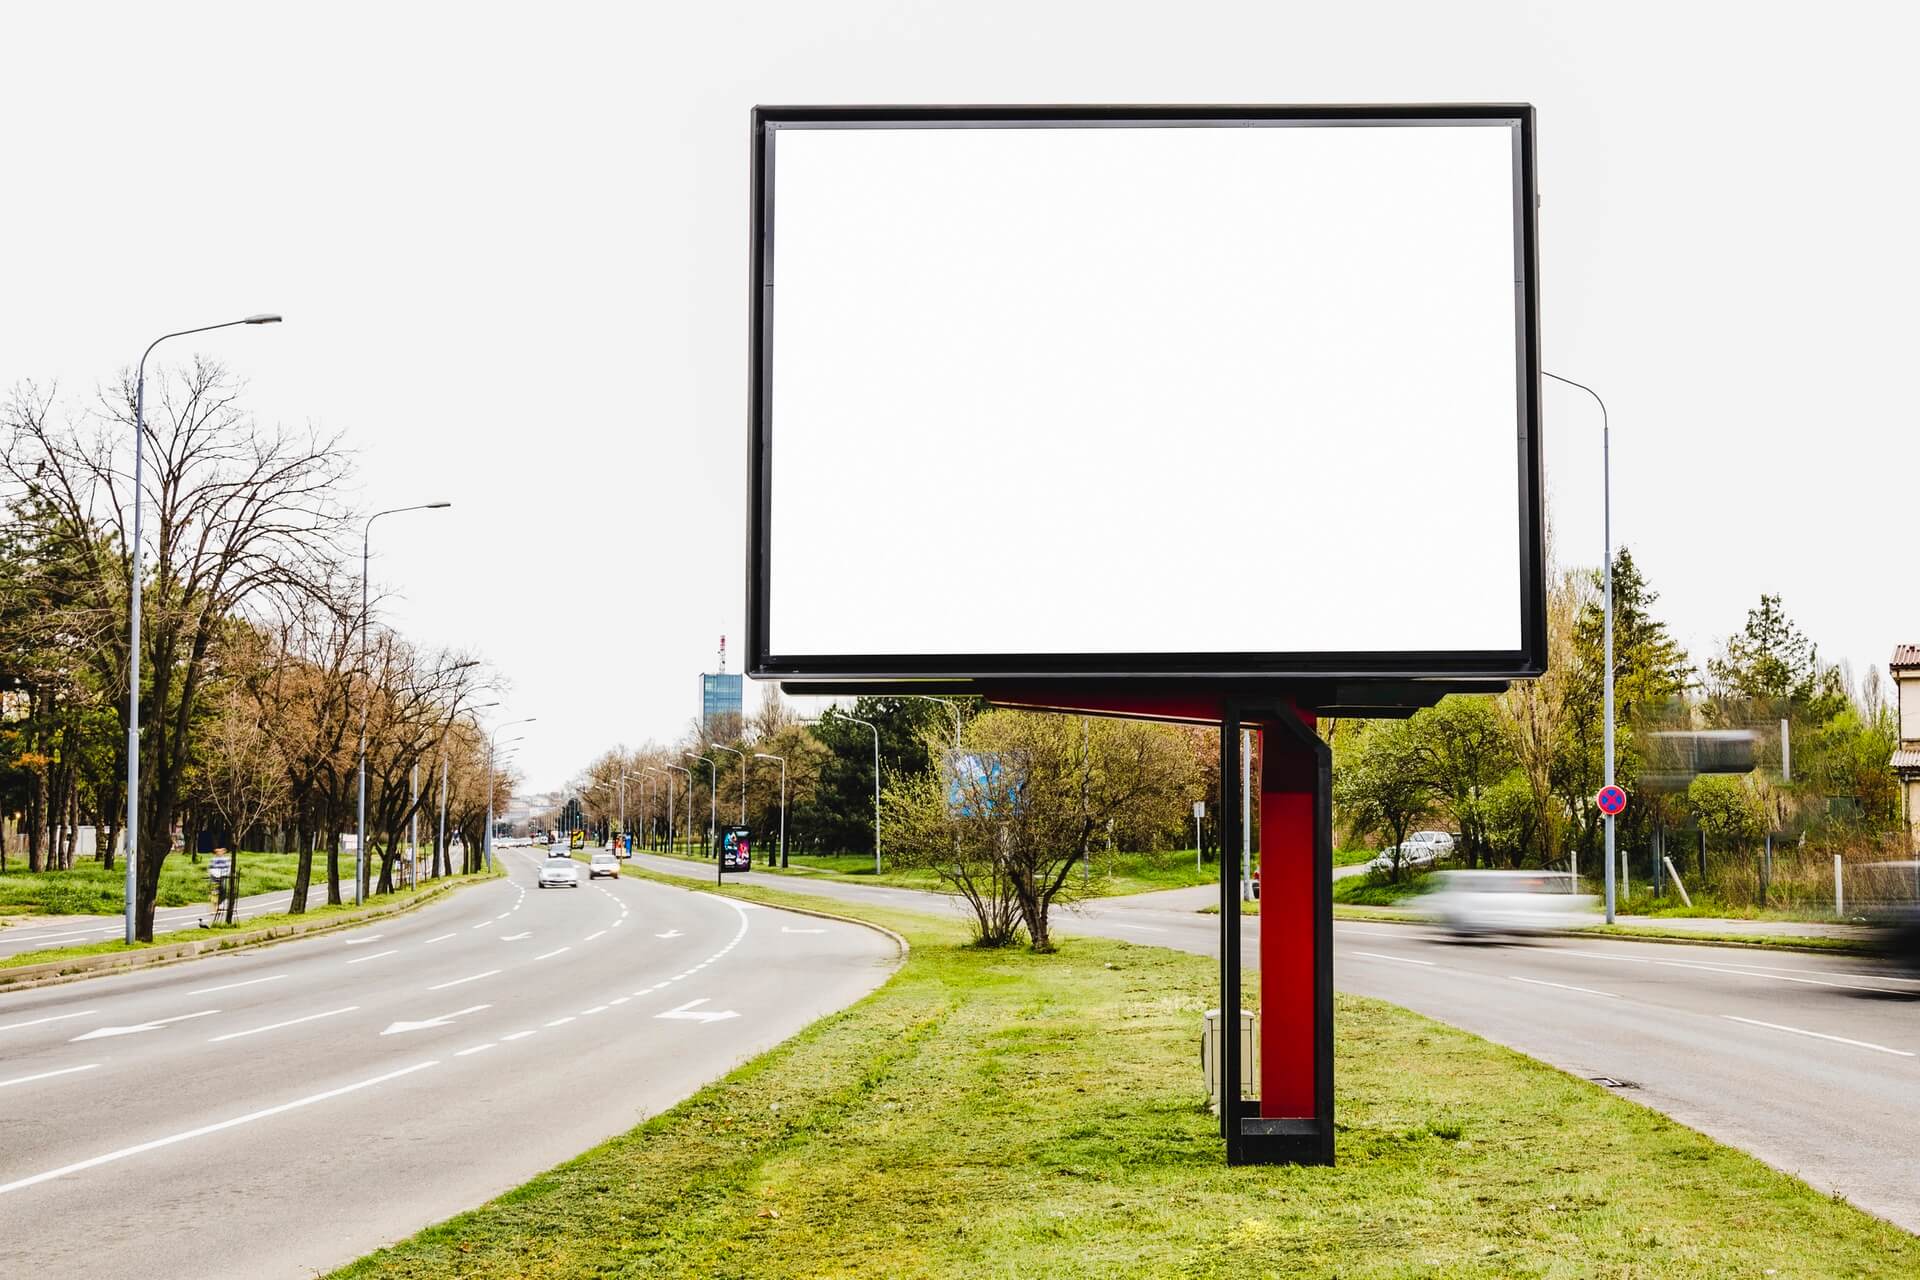 Street Canvases: How do LED billboards become a medium for urban creative expression?